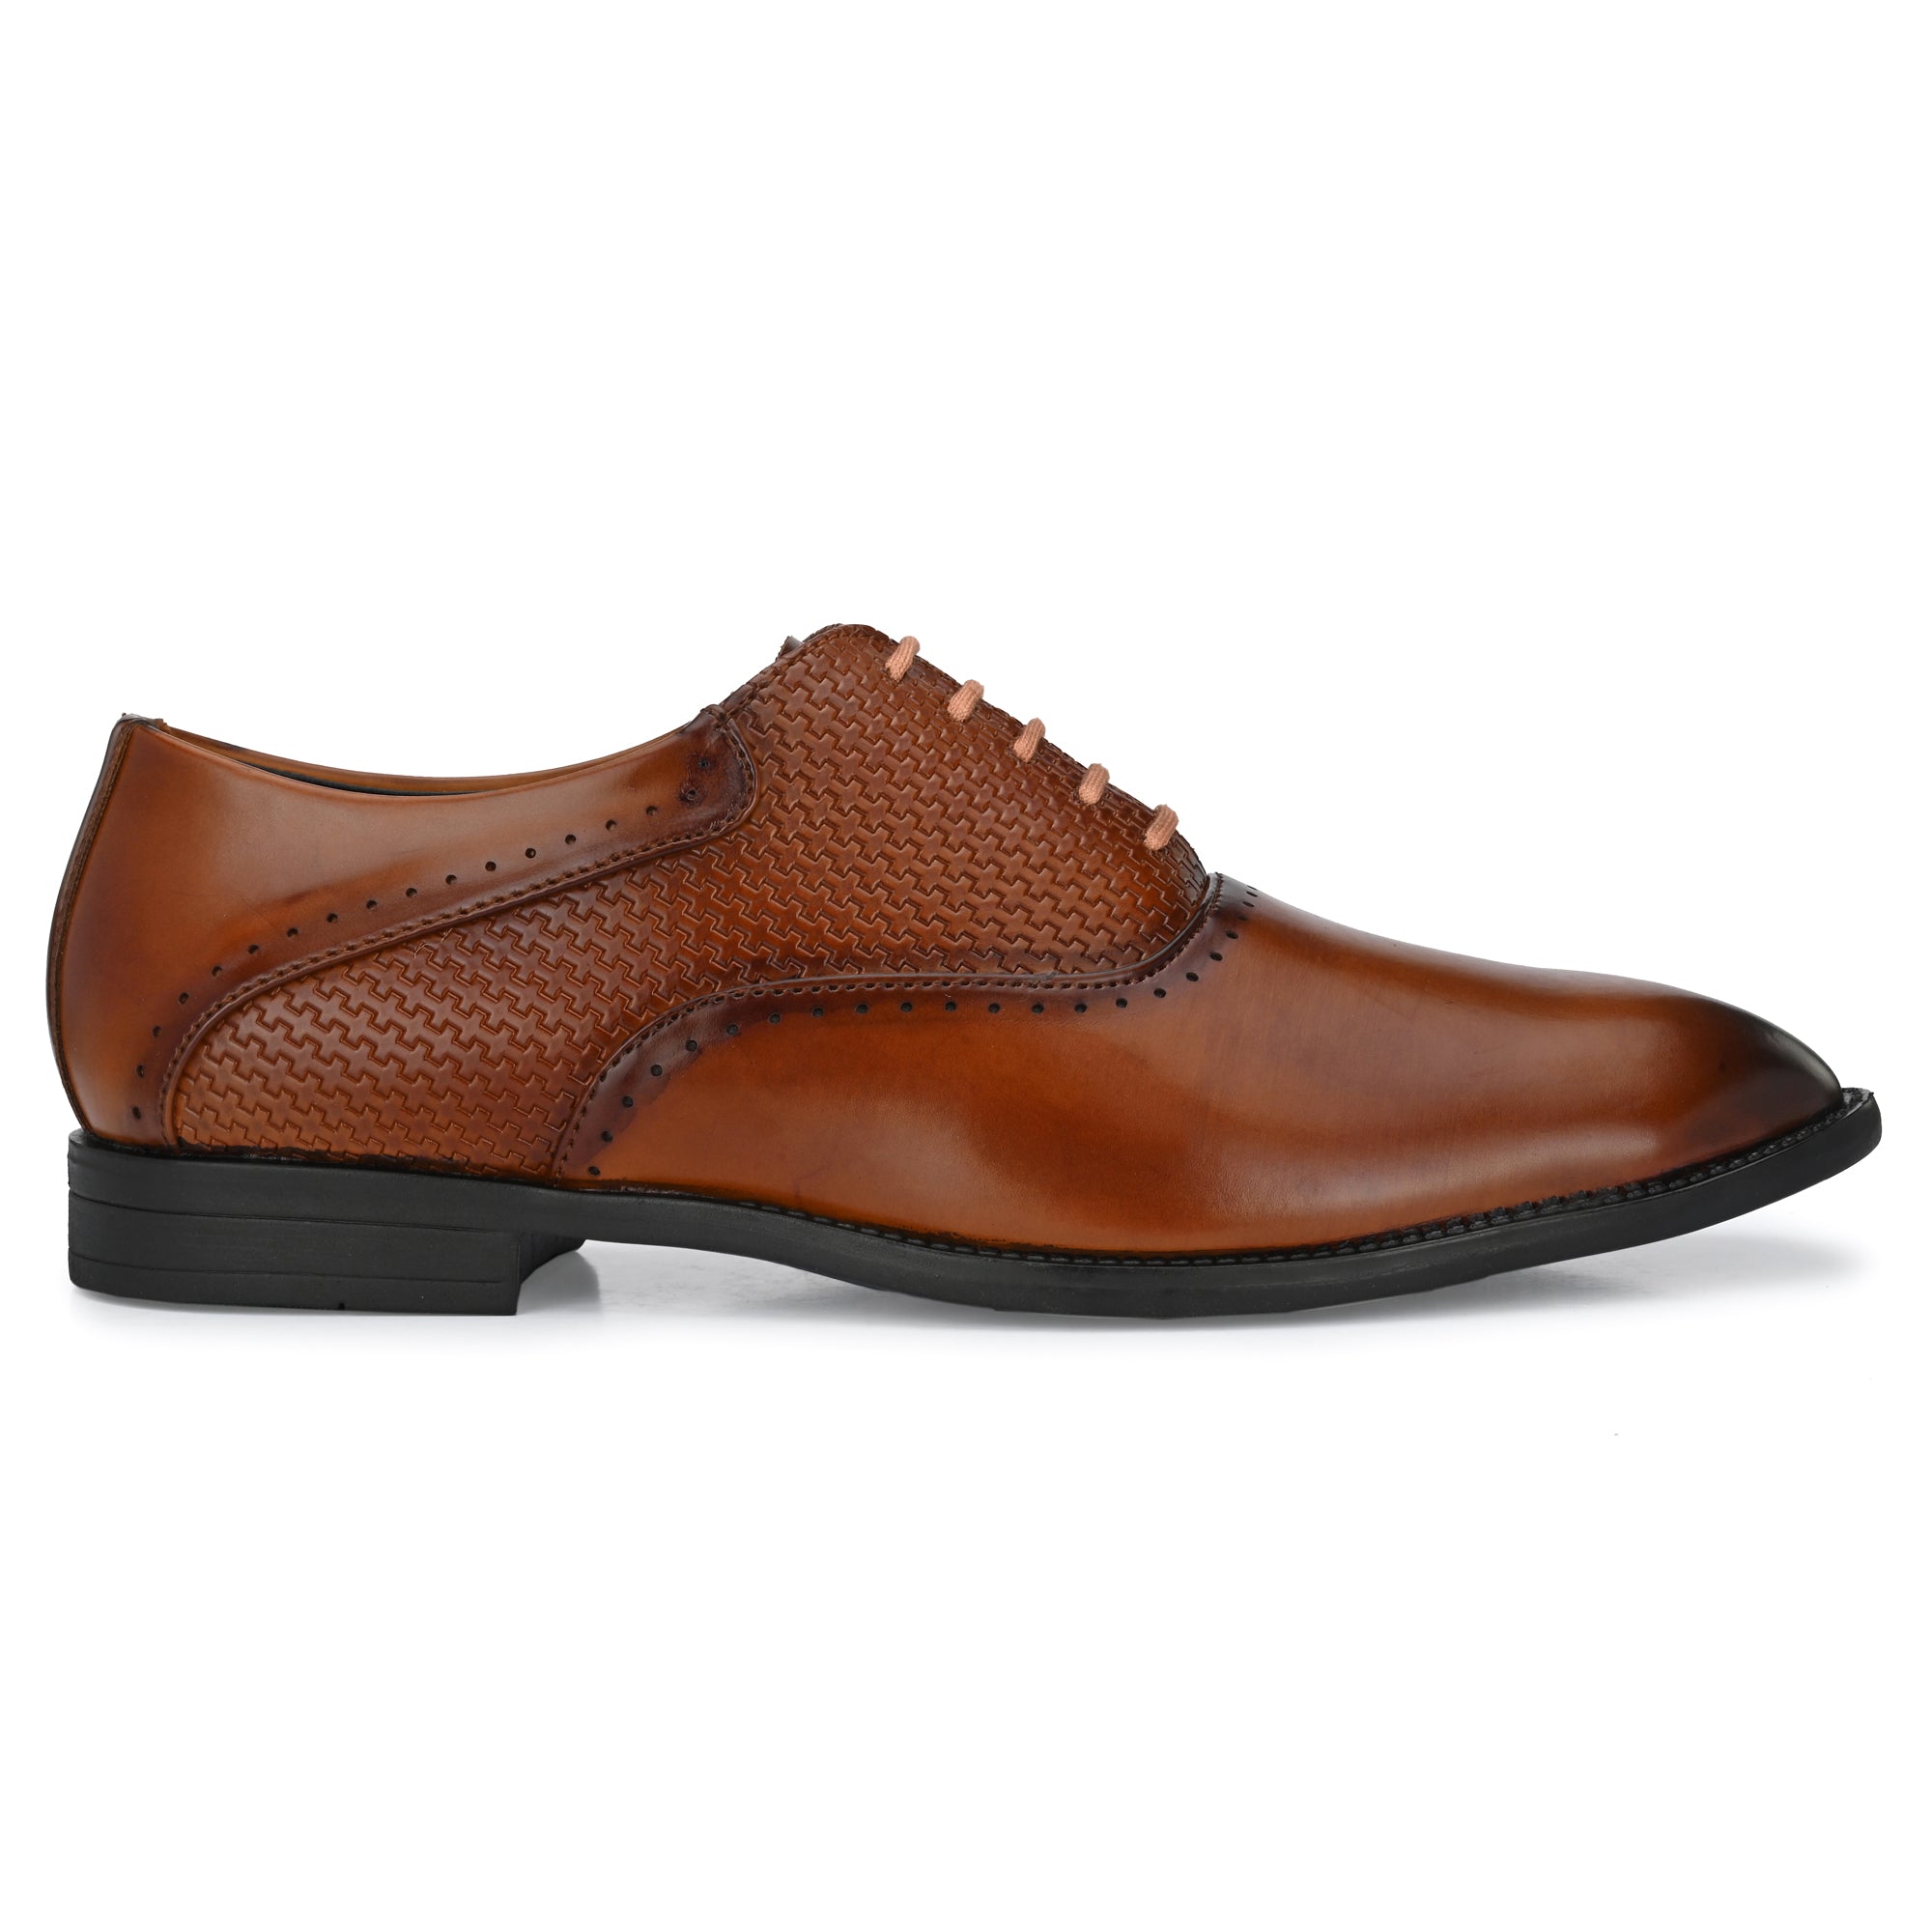 Attitudist Handcrafted Oxford Gradient Tan Formal Laceup Derby Shoes With Semi Chatai Design For Men MTOBSF